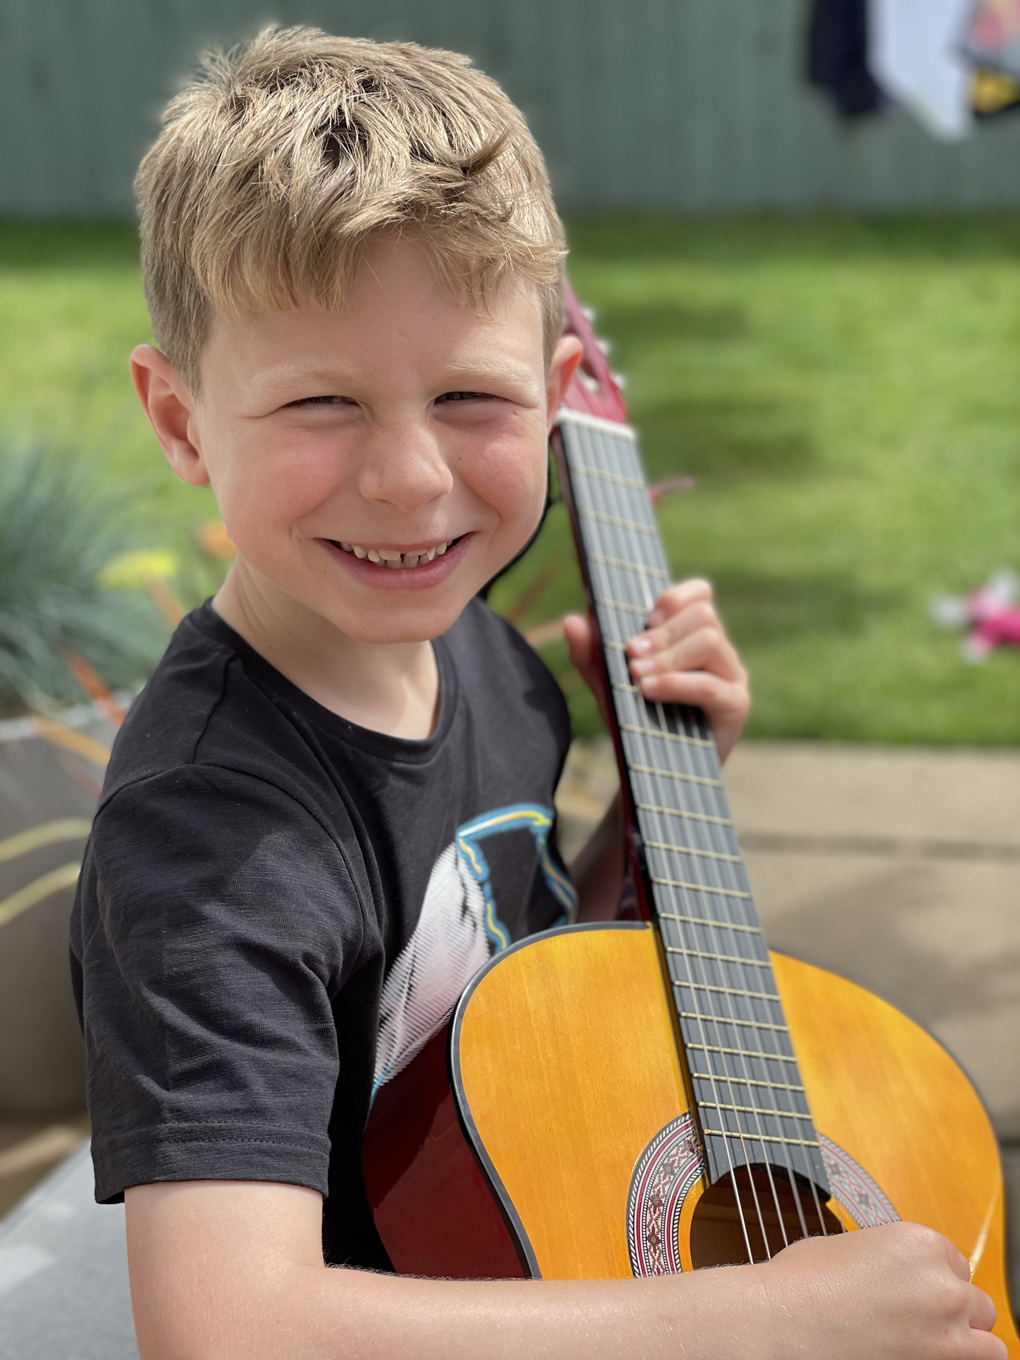 Picture of boy playing guitar in garden